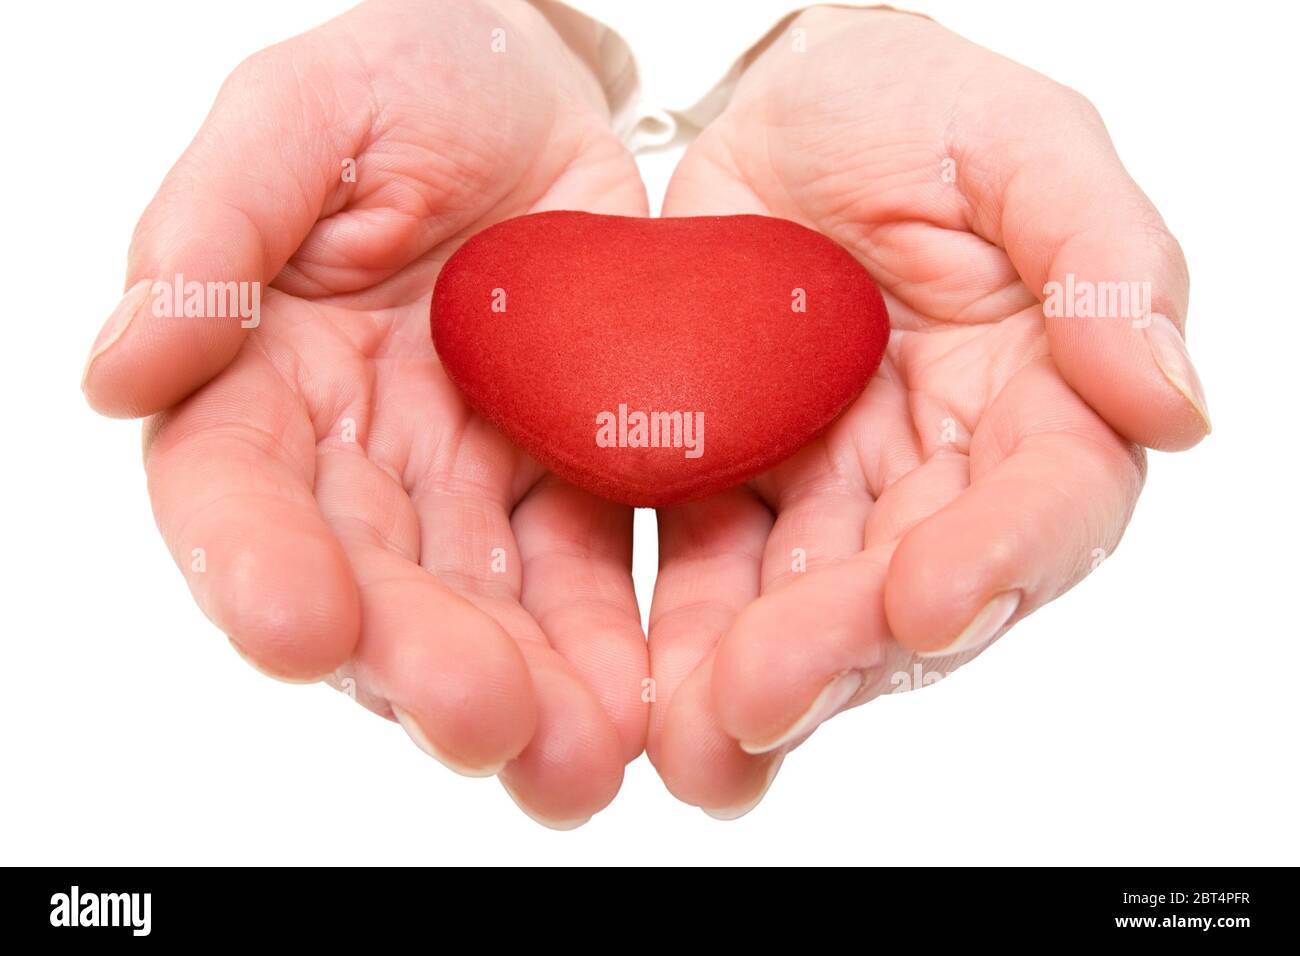 hand, romantic, hold, love, in love, fell in love, valentine, assistance, help, Stock Photo